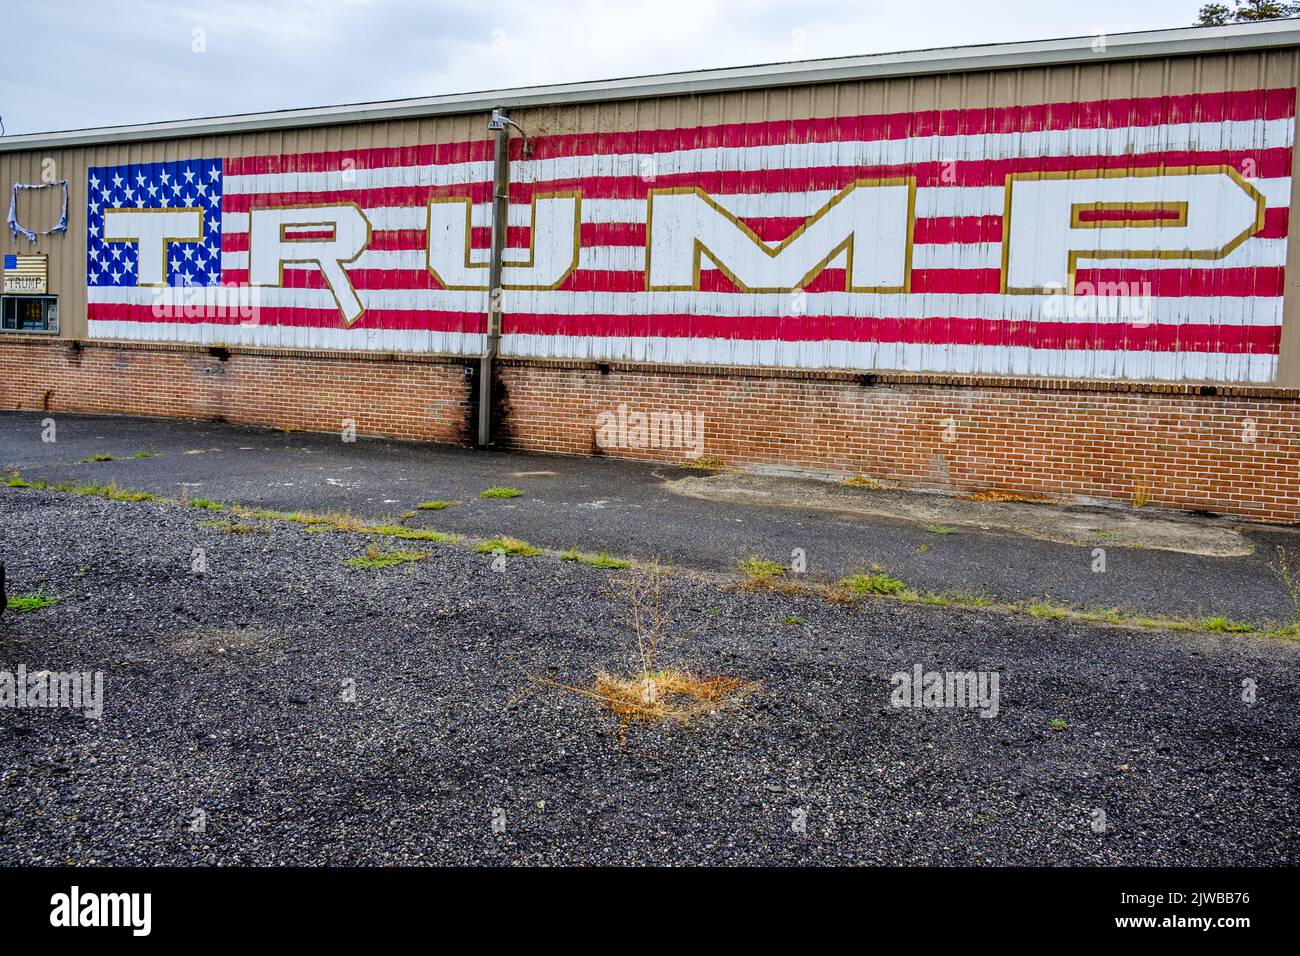 A large Donald Trump sign painted on the side of a building near Selinsgrove, PA, USA. Stock Photo